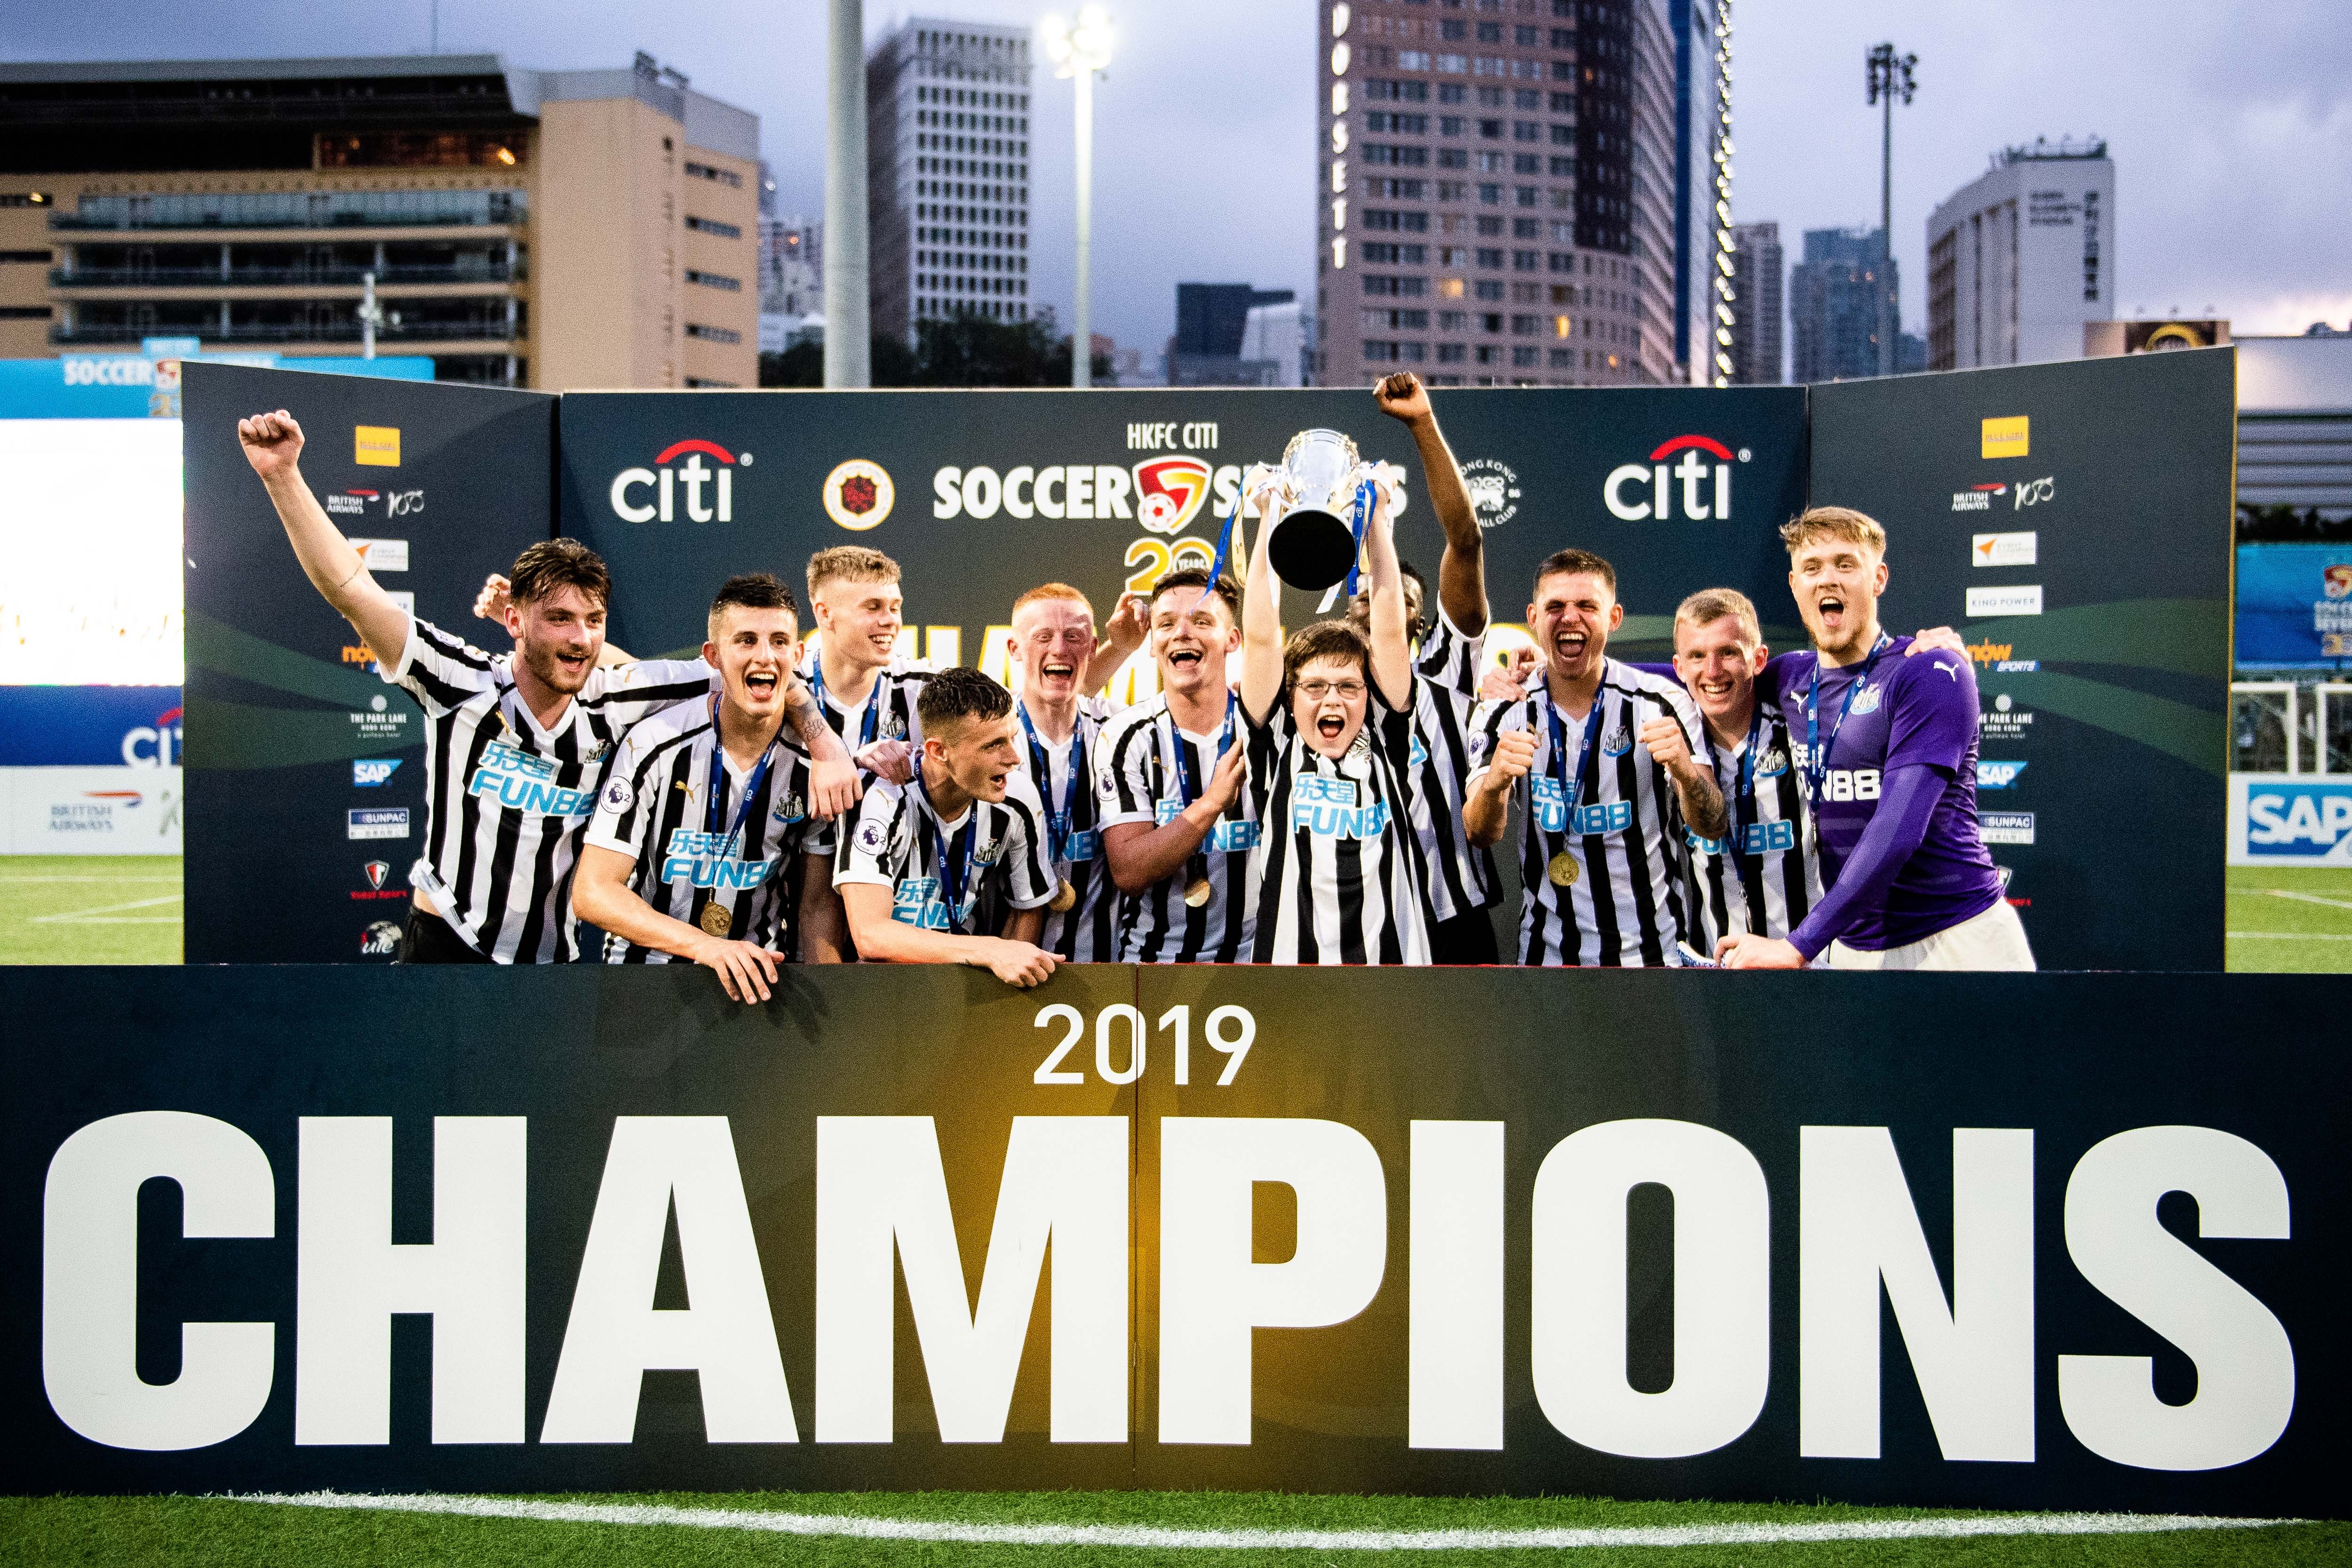 Matty Longstaff (centre) was part of the title-winning Newcastle United side at the Hong Kong Citi Soccer Sevens 2019 at Hong Kong Football Club. Photo: Eurasia Sport Images